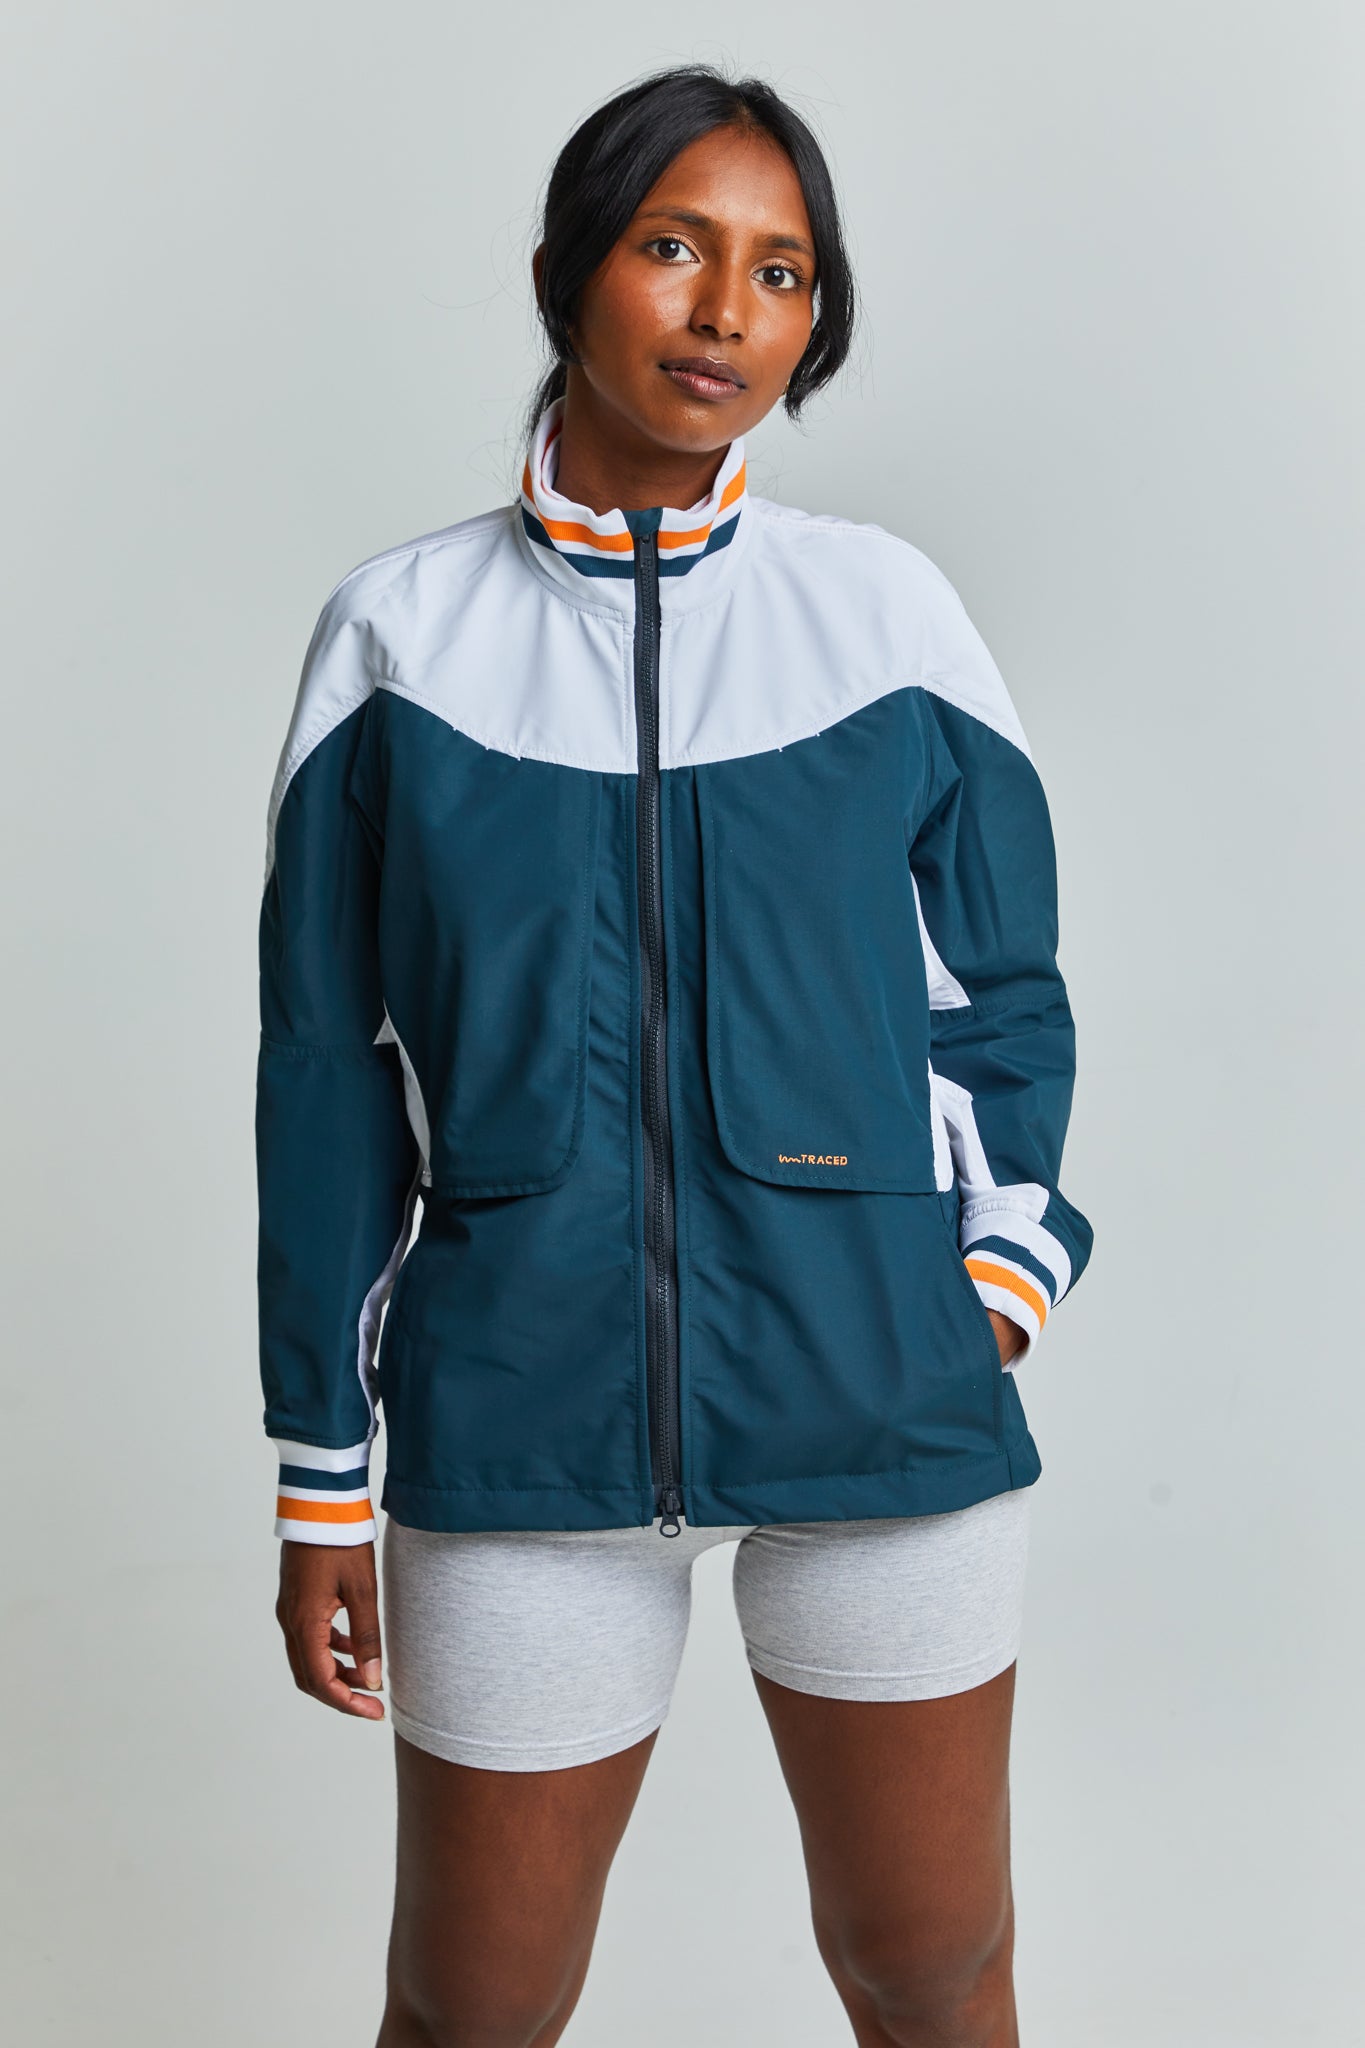 Technical Golf Jacket Women Recycled bluesign approved